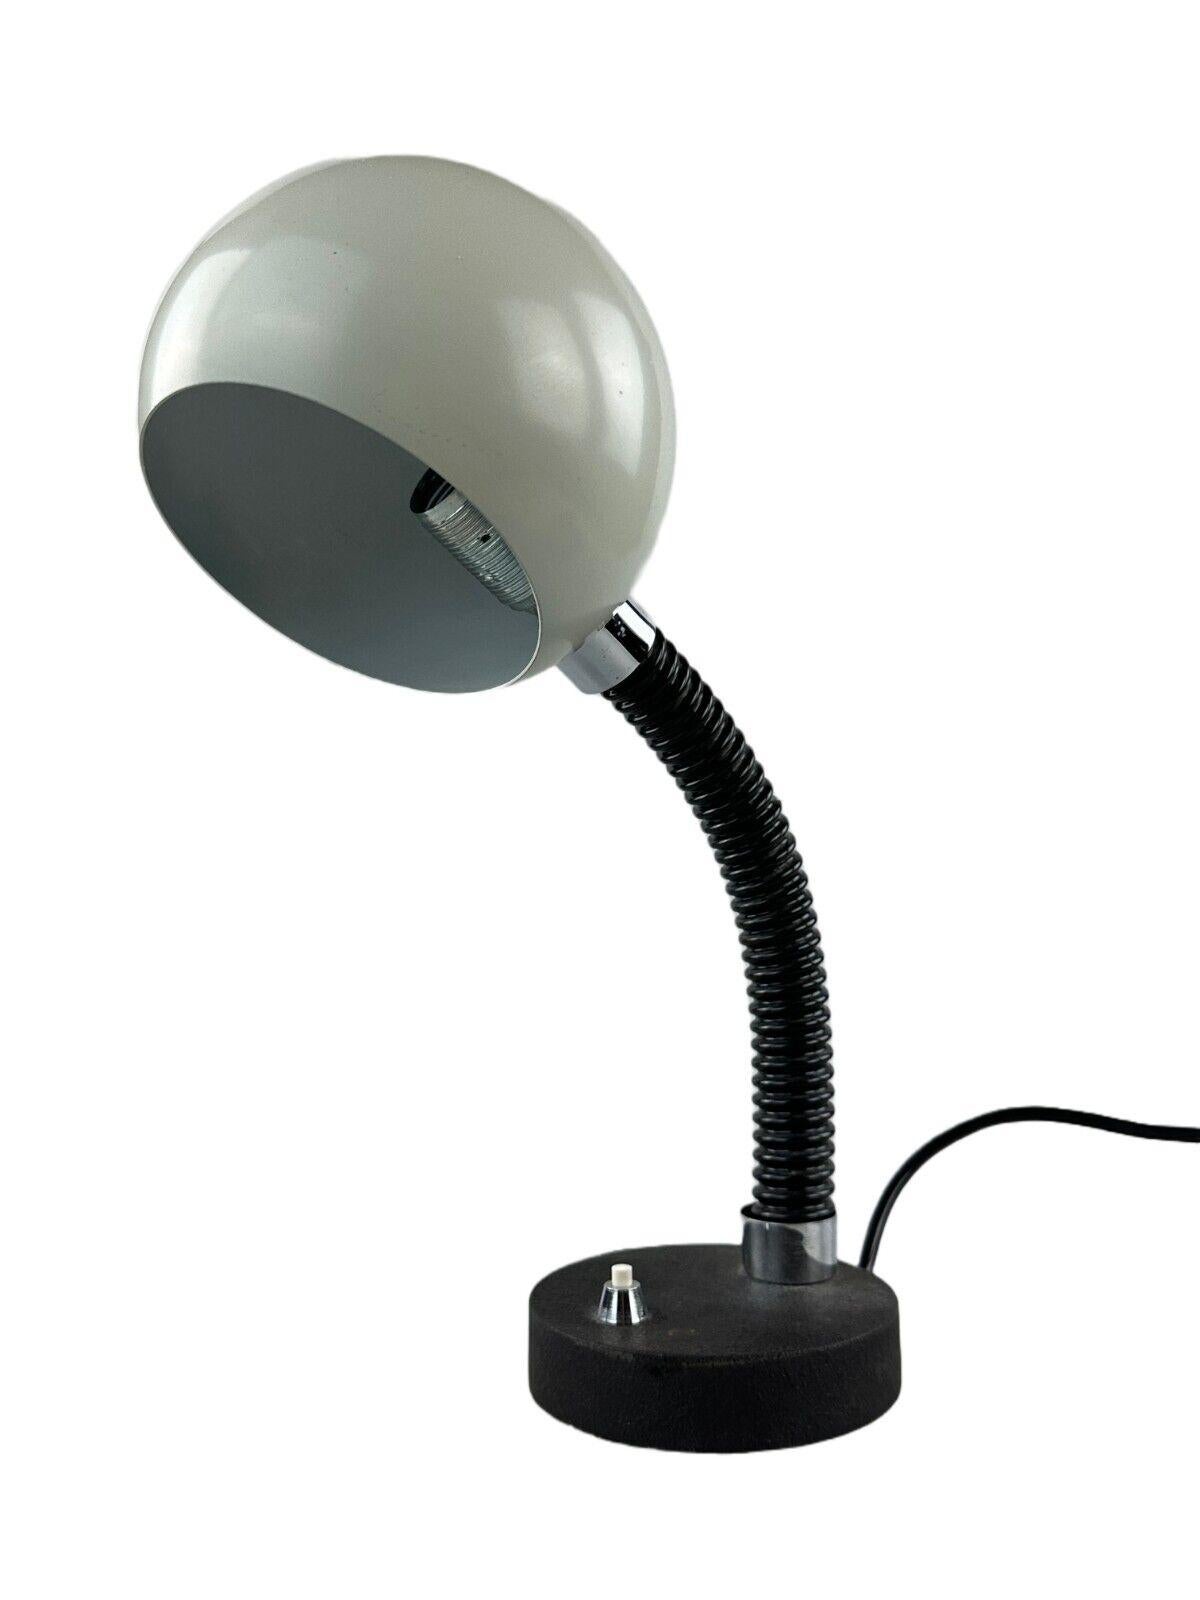 60s 70s table lamp Egon Hillebrand spherical lamp Space Age metal design

Object: table lamp

Manufacturer: Hillebrand

Condition: good

Age: around 1960-1970

Dimensions:

Width = 25cm
Depth = 14cm
Height = 32cm

Other notes:

E14 socket

The